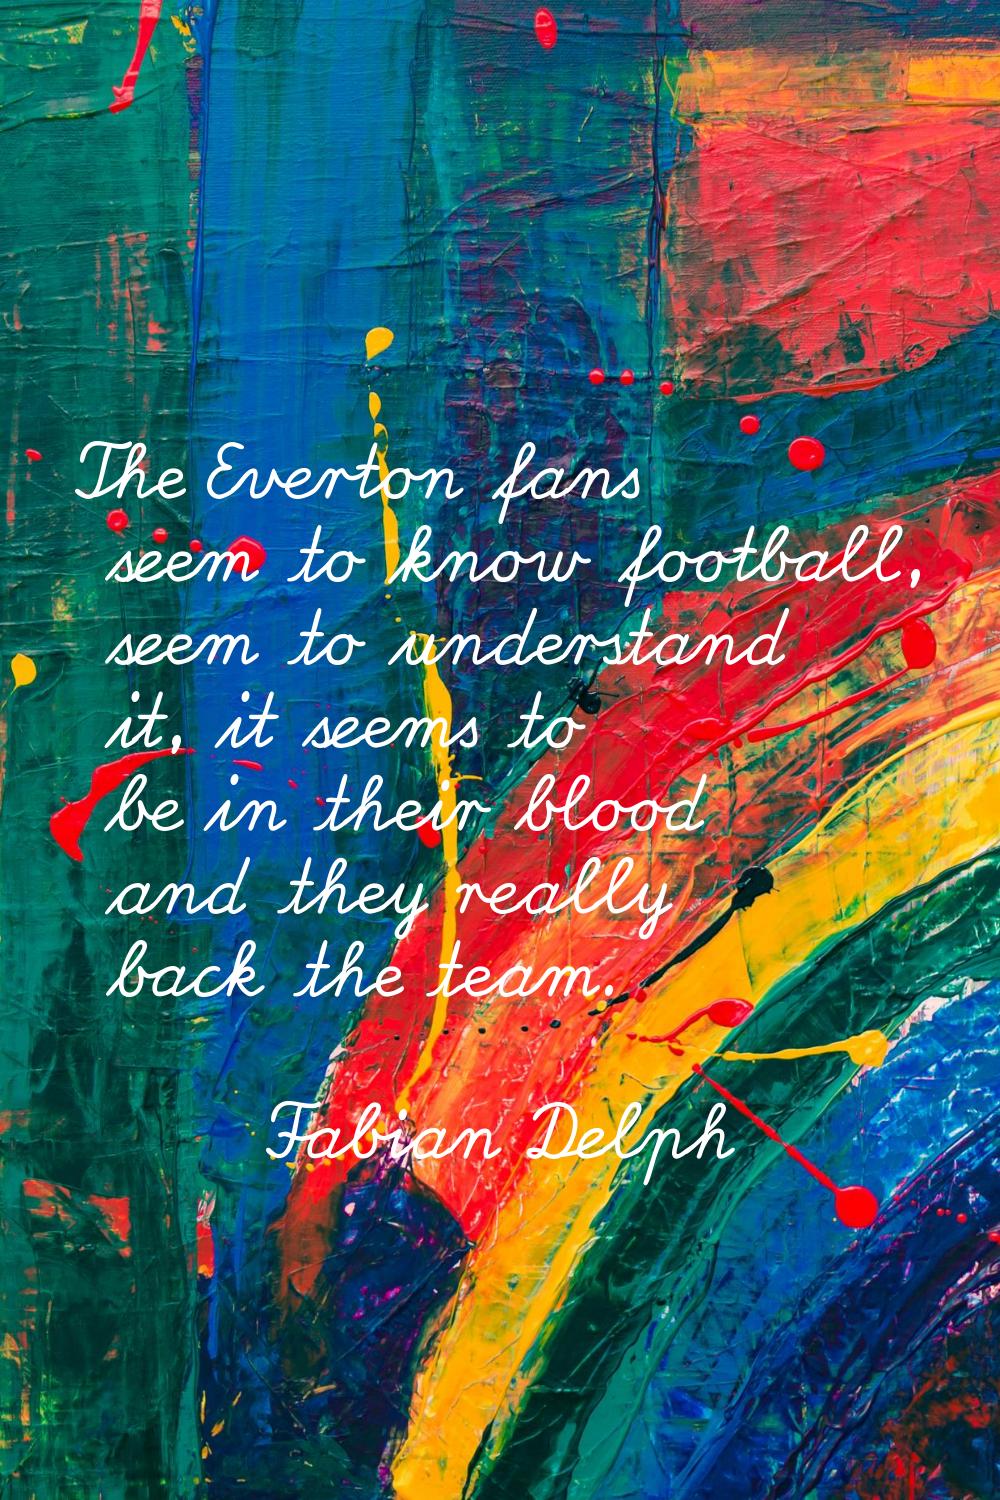 The Everton fans seem to know football, seem to understand it, it seems to be in their blood and th